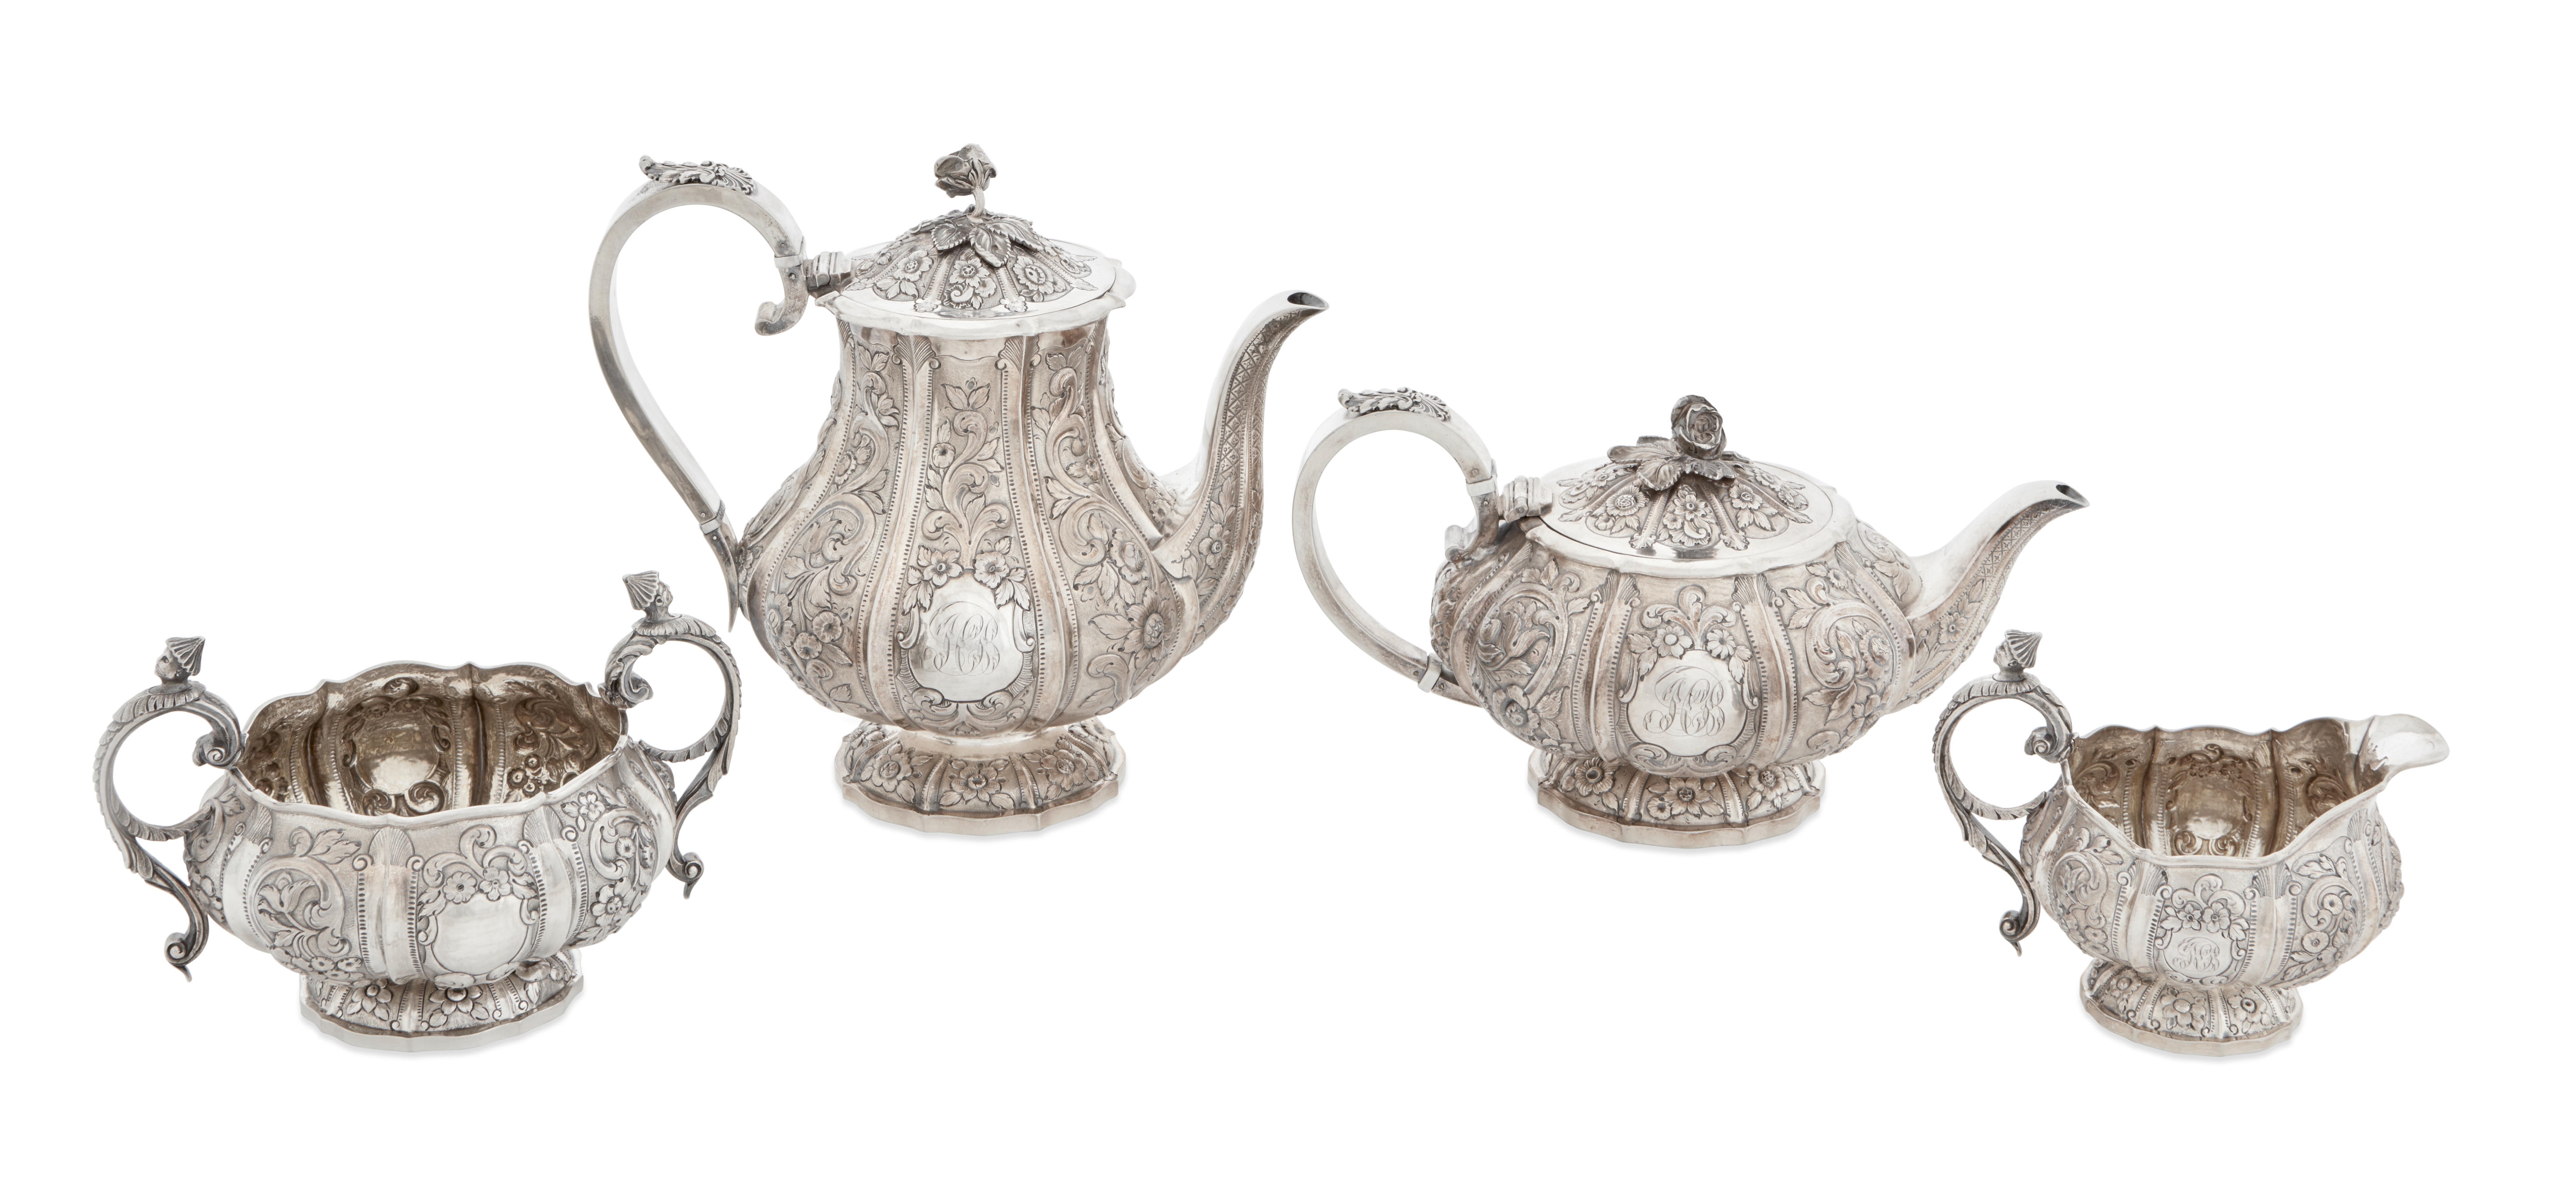 An English sterling silver 4-piece tea and coffee service